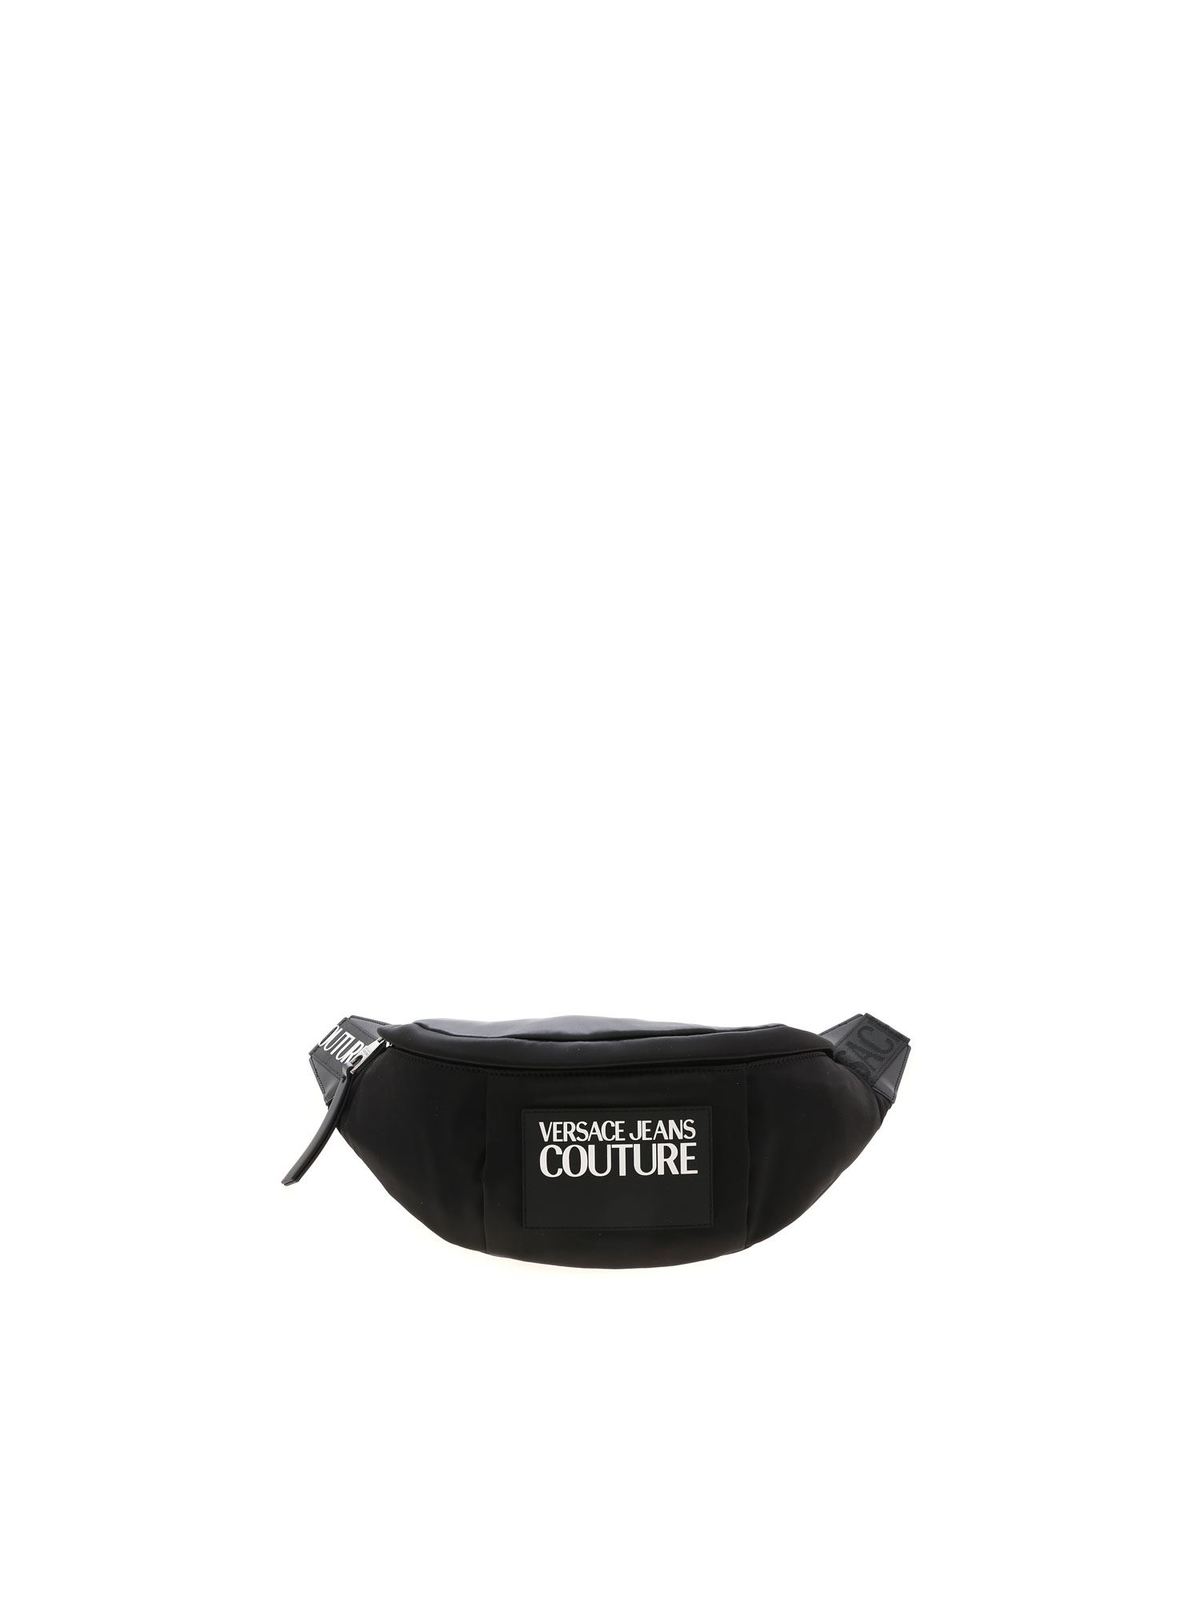 VERSACE JEANS COUTURE TAG LOGO BELT BAG IN BLACK